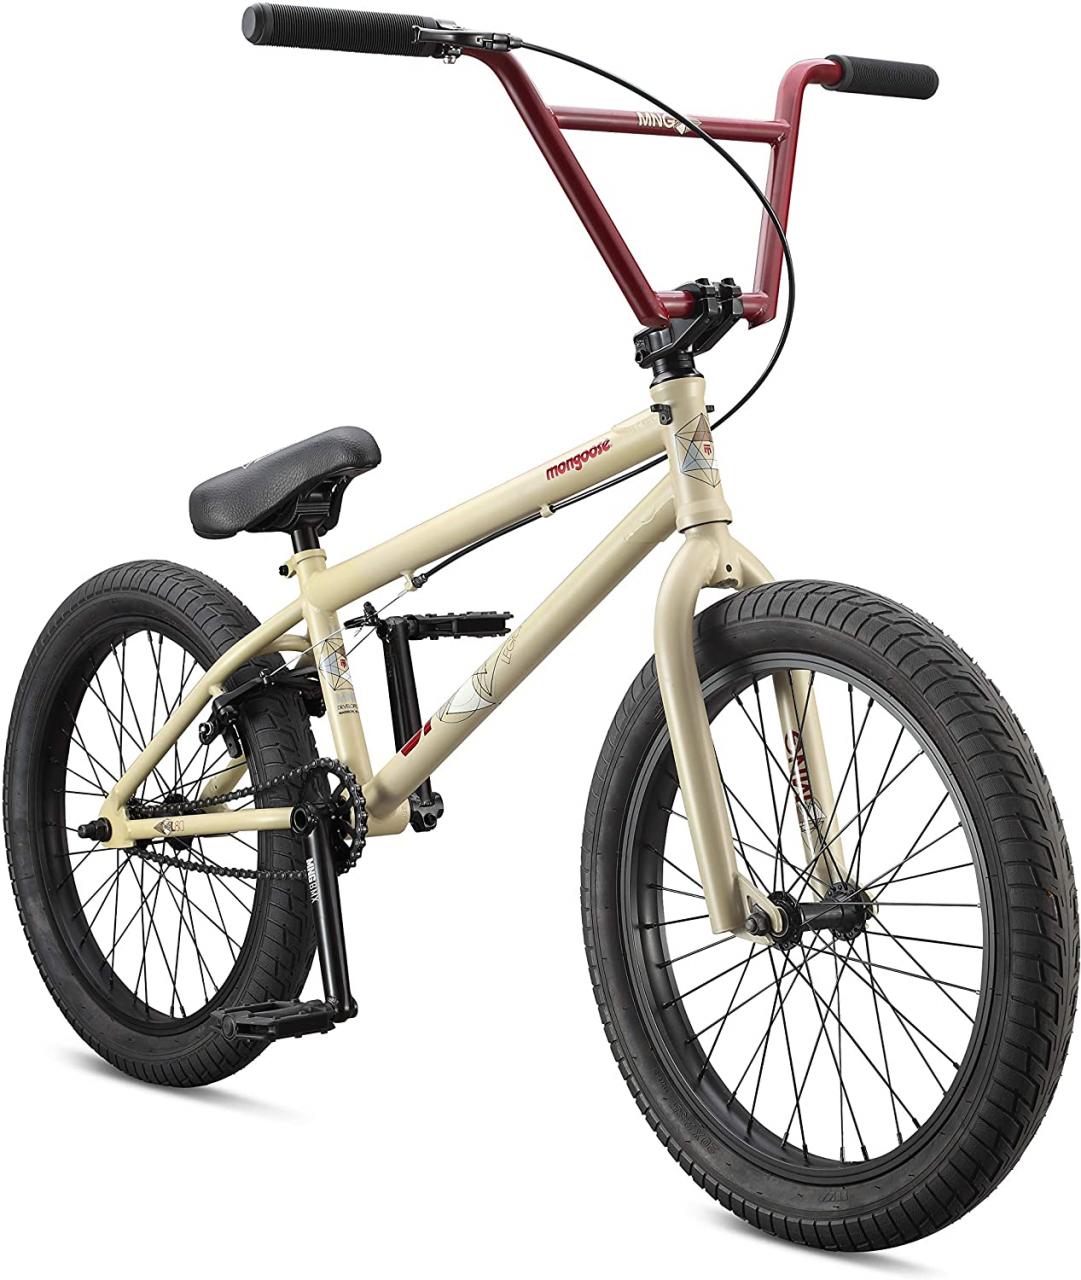 Buy Mongoose Legion Freestyle BMX Bike Line for Kids, Youth and  Beginner-Level to Advanced Adult Riders, 20-Inch Wheels, Steel Frame,  Multiple Colors Online in Hong Kong. B088NS783Q